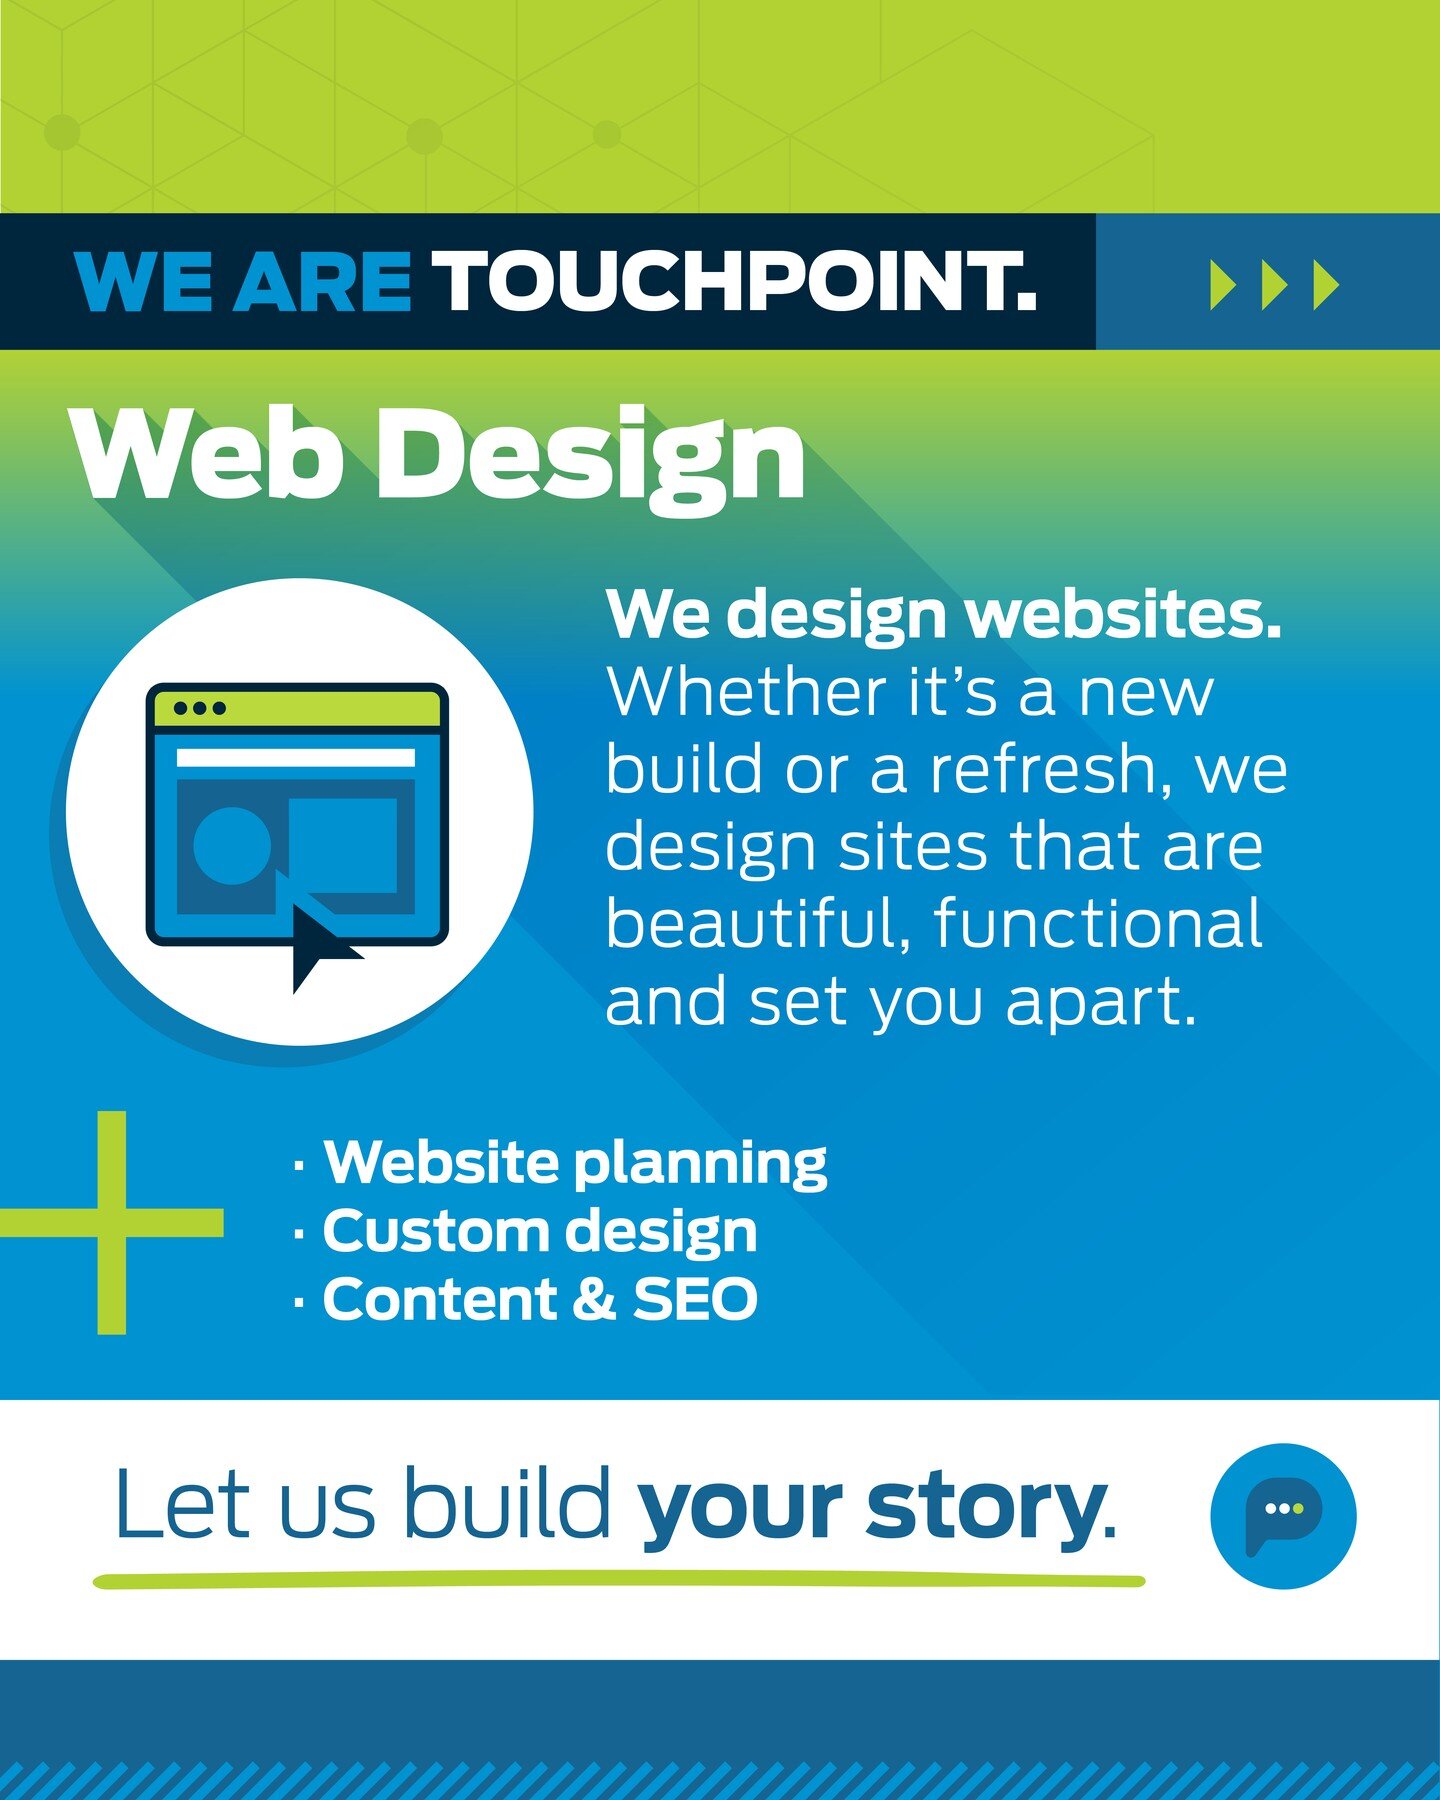 We design websites. Whether it's a new build or a refresh, we design sites that are beautiful, functional and set you apart. 

To check out our web design capabilities, visit our website or email laura@touchpointmedia.com to get in touch.

#websitepl